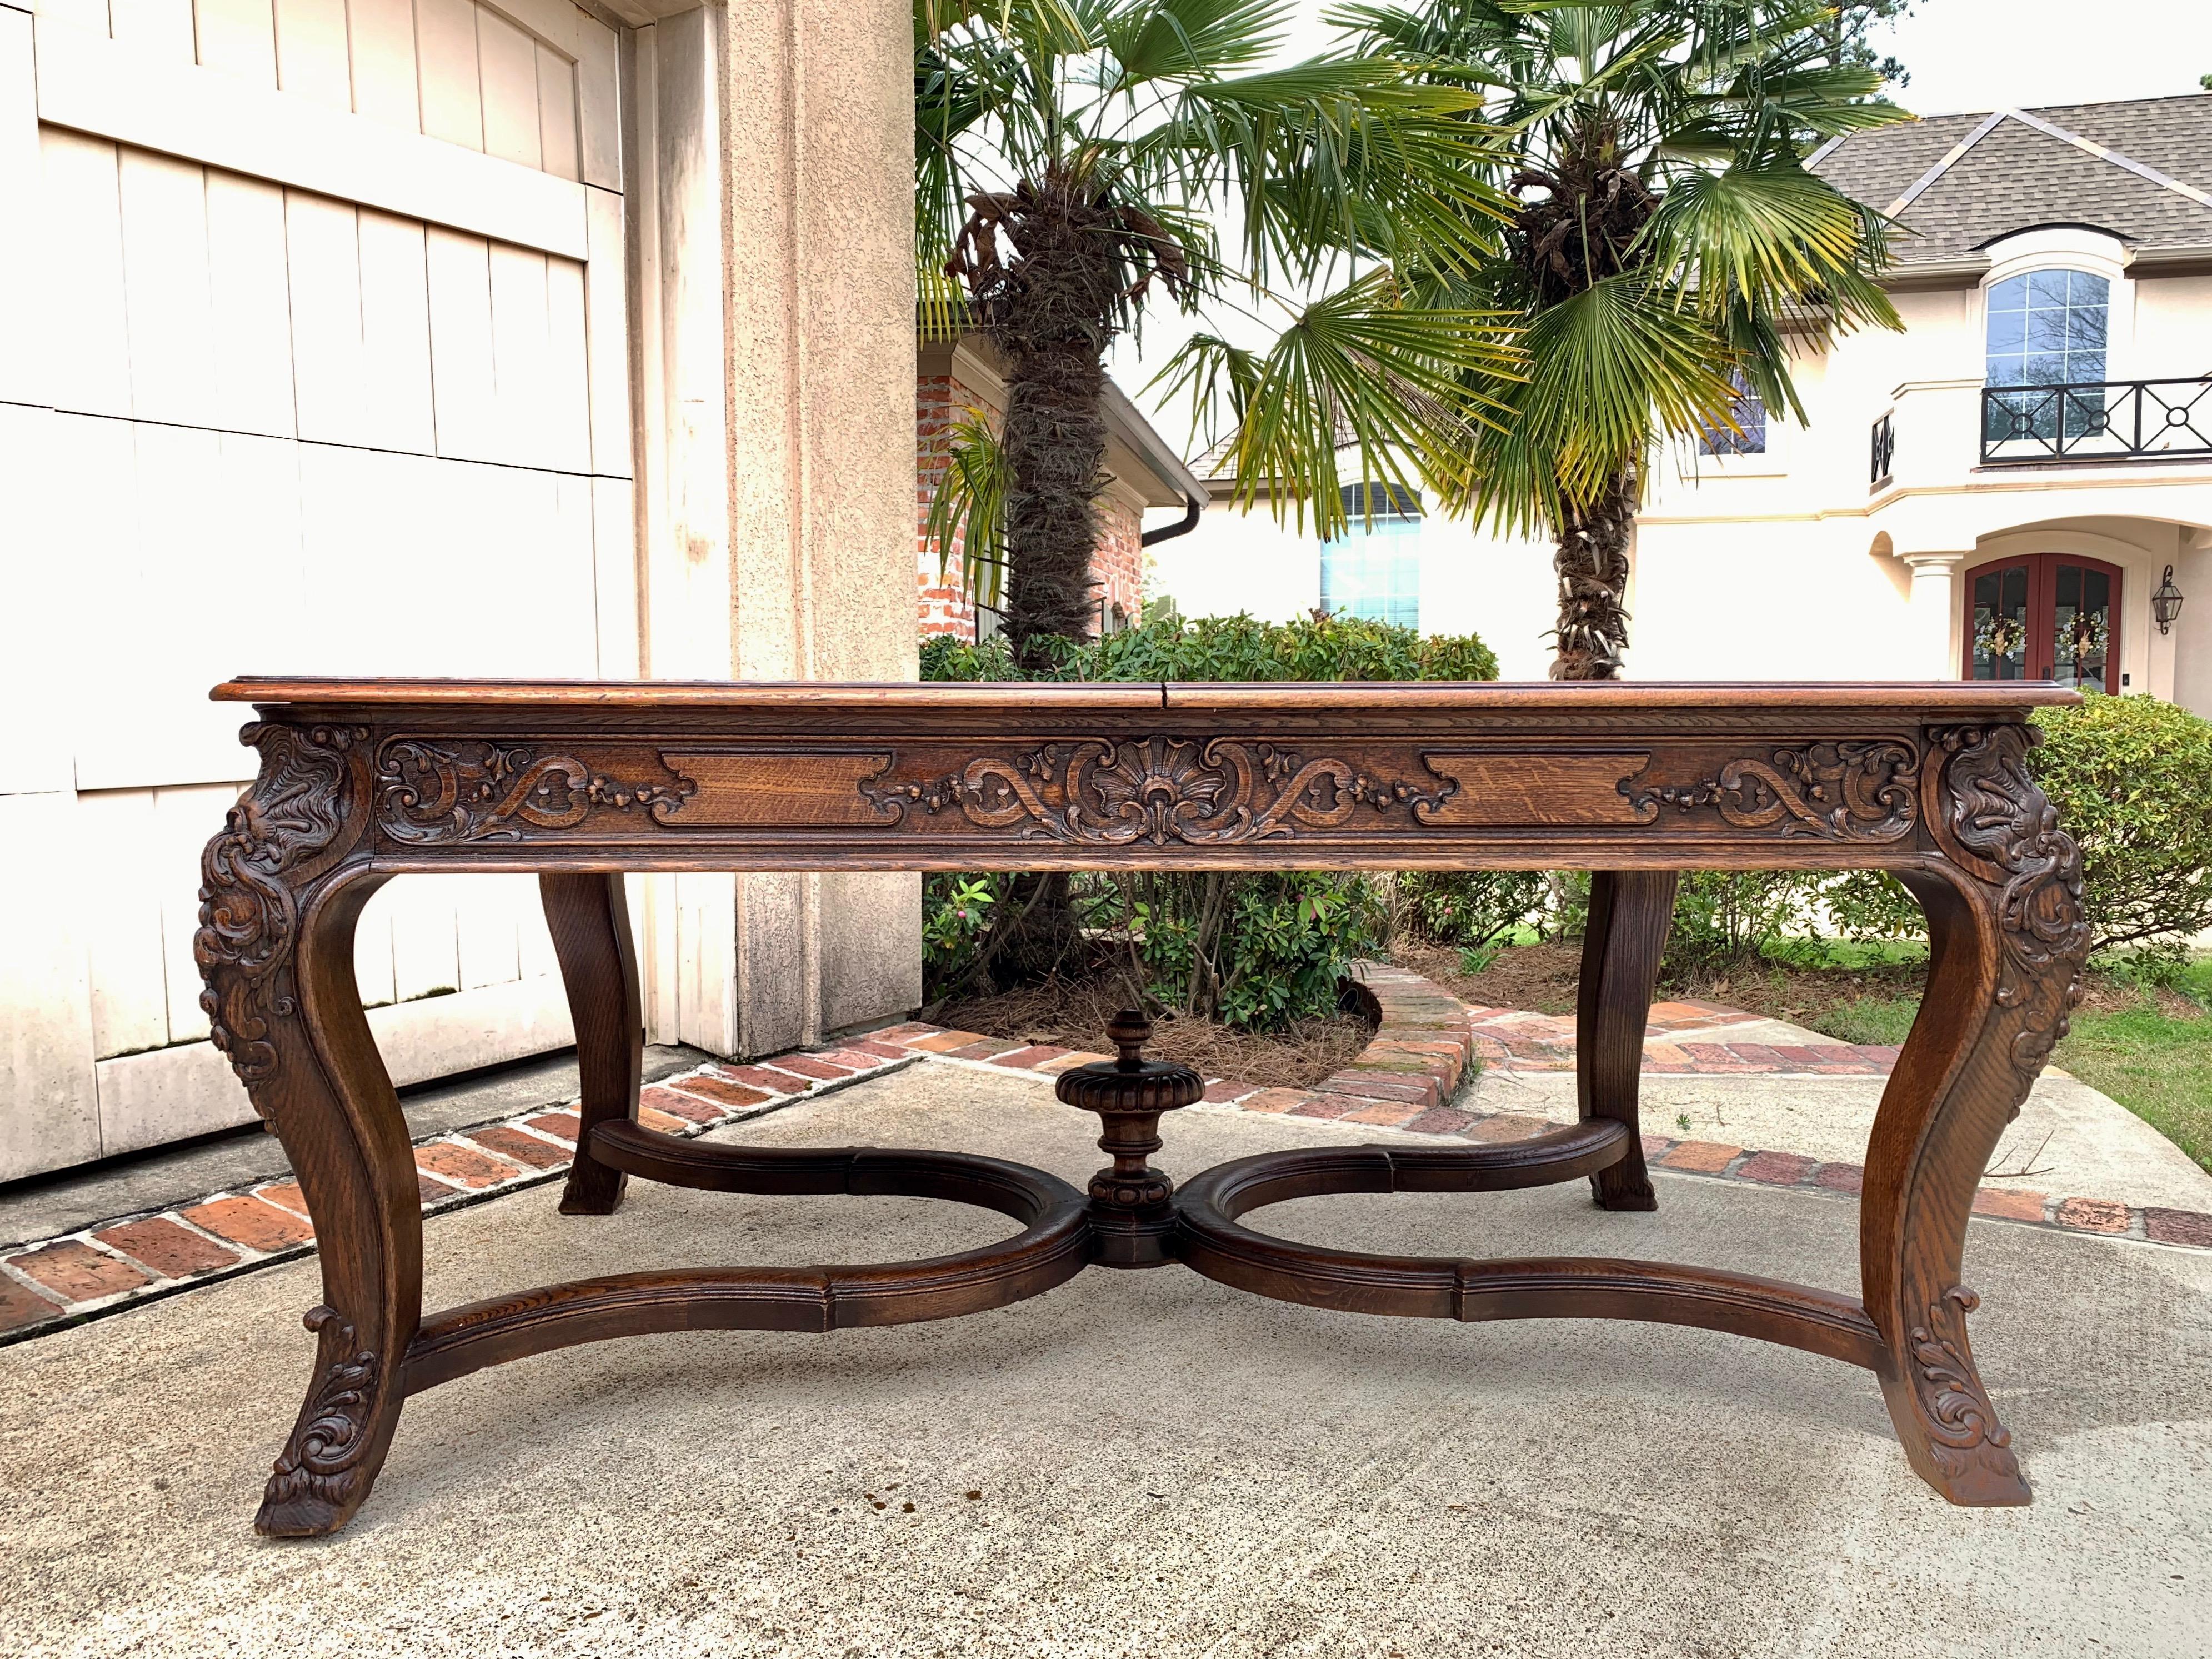 Direct from France, a heavy and substantial antique French carved dining table!~
~Stunning hand carved details, definitely above average quality, as you can tell with one glance to the massive carvings. The table legs have dimensional French shells